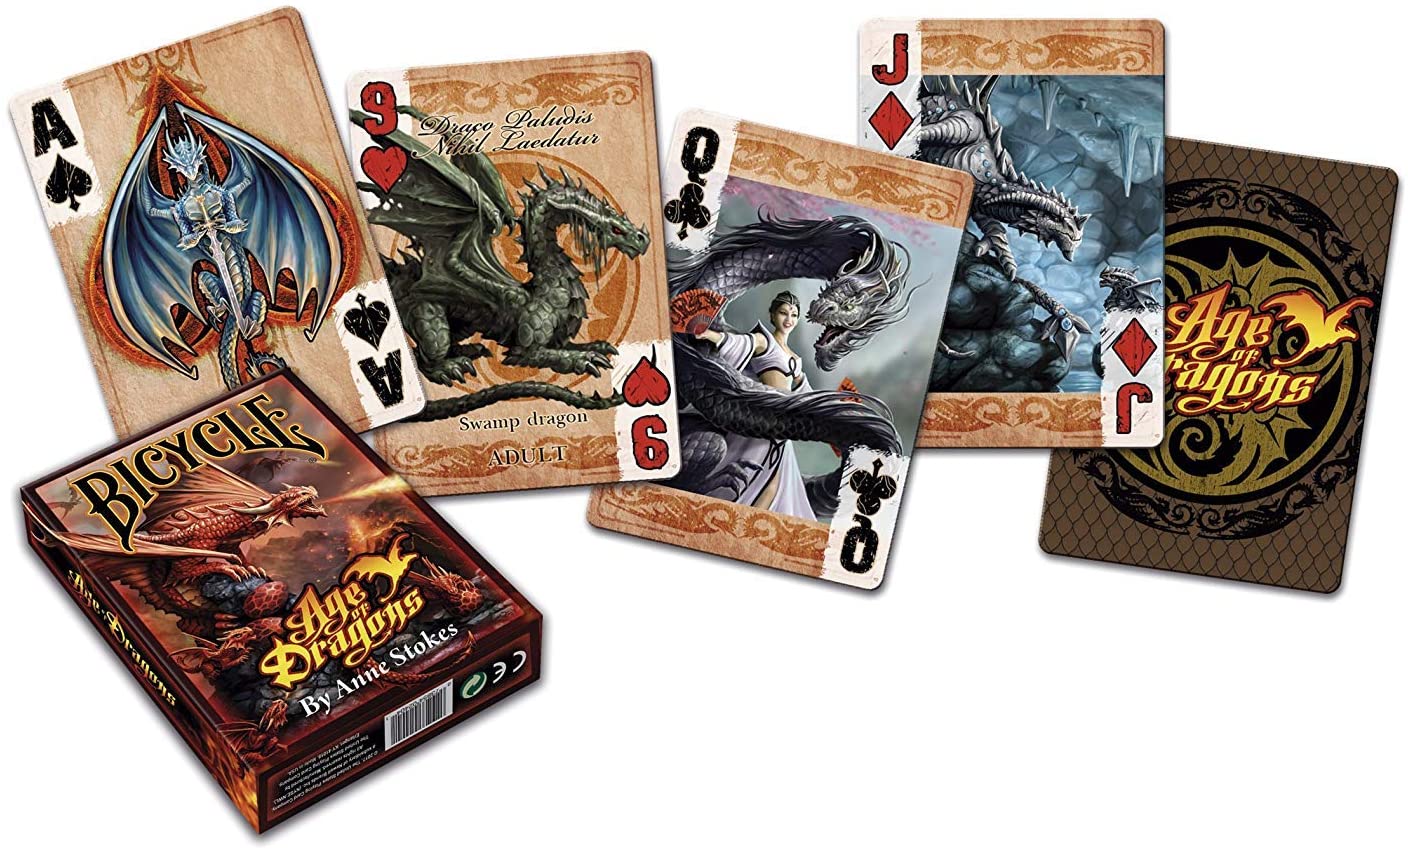 Bicycle Playing cards Age of Dragons by Anne Stokes